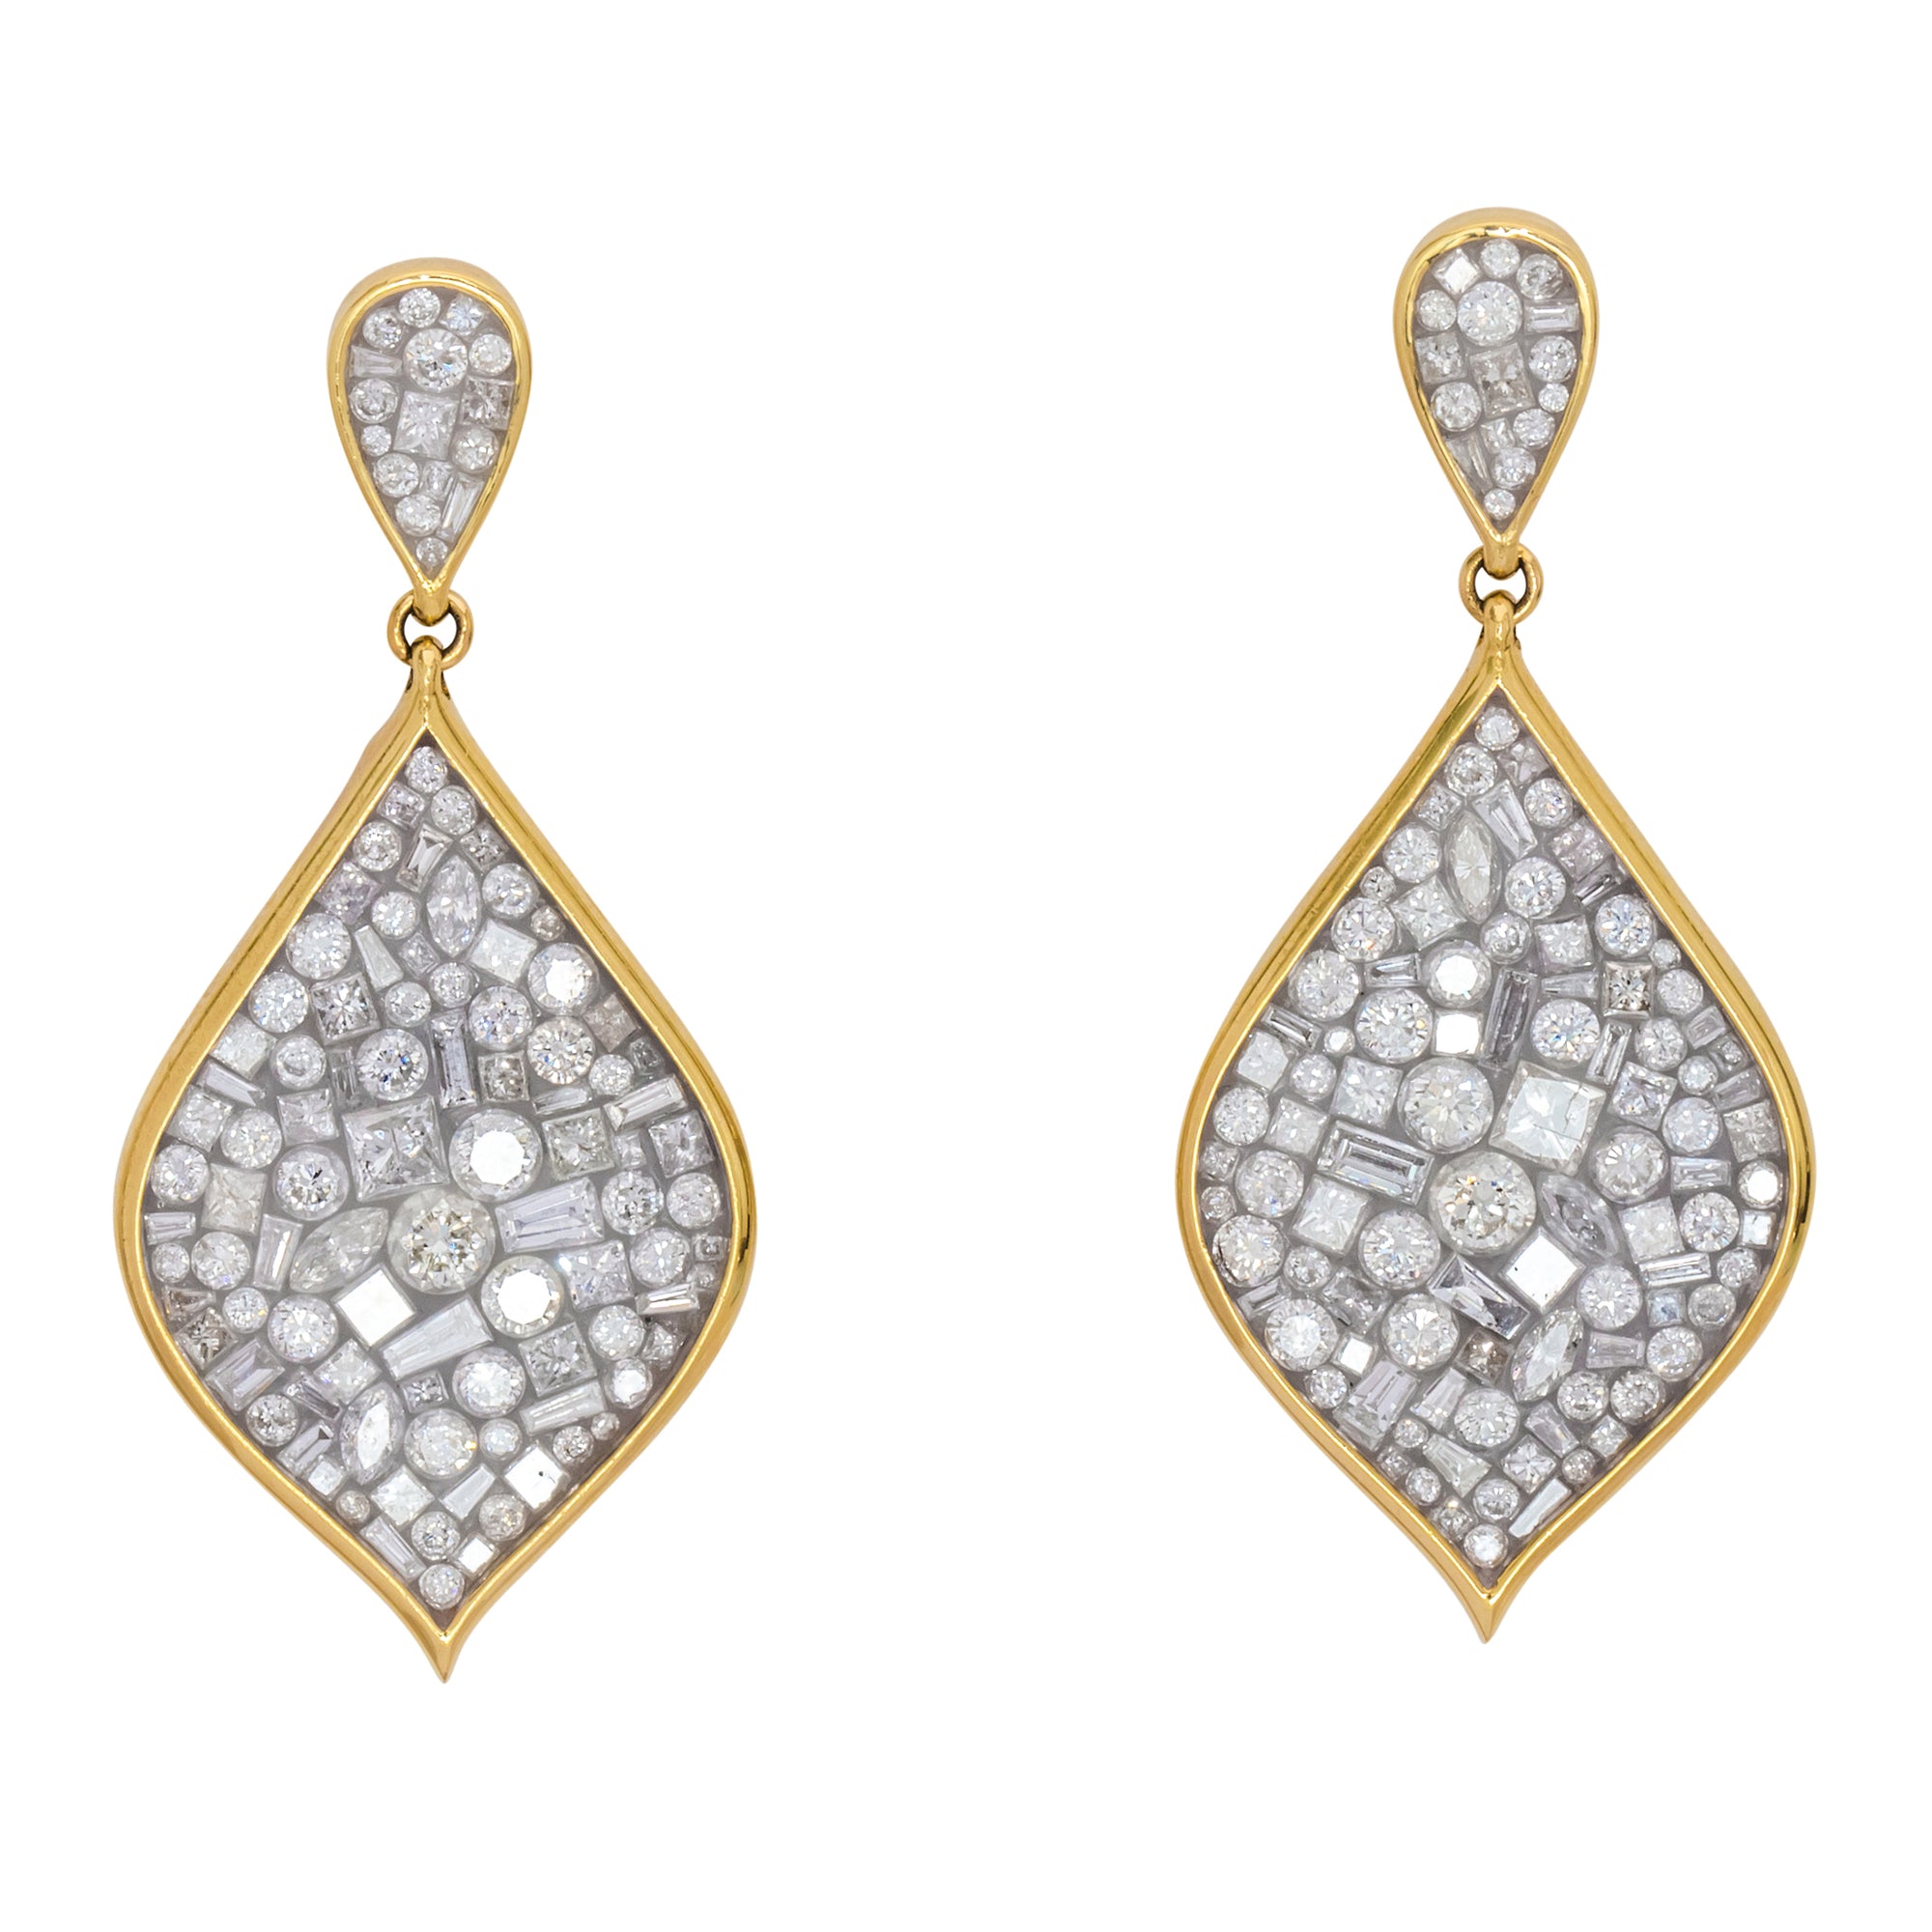 Ice Medium Genie Diamond Earrings by Pleve available at Talisman Collection Fine Jewelers in El Dorado Hills, CA and online. Specs: 5.00 cttw diamonds, 18k yellow gold. 